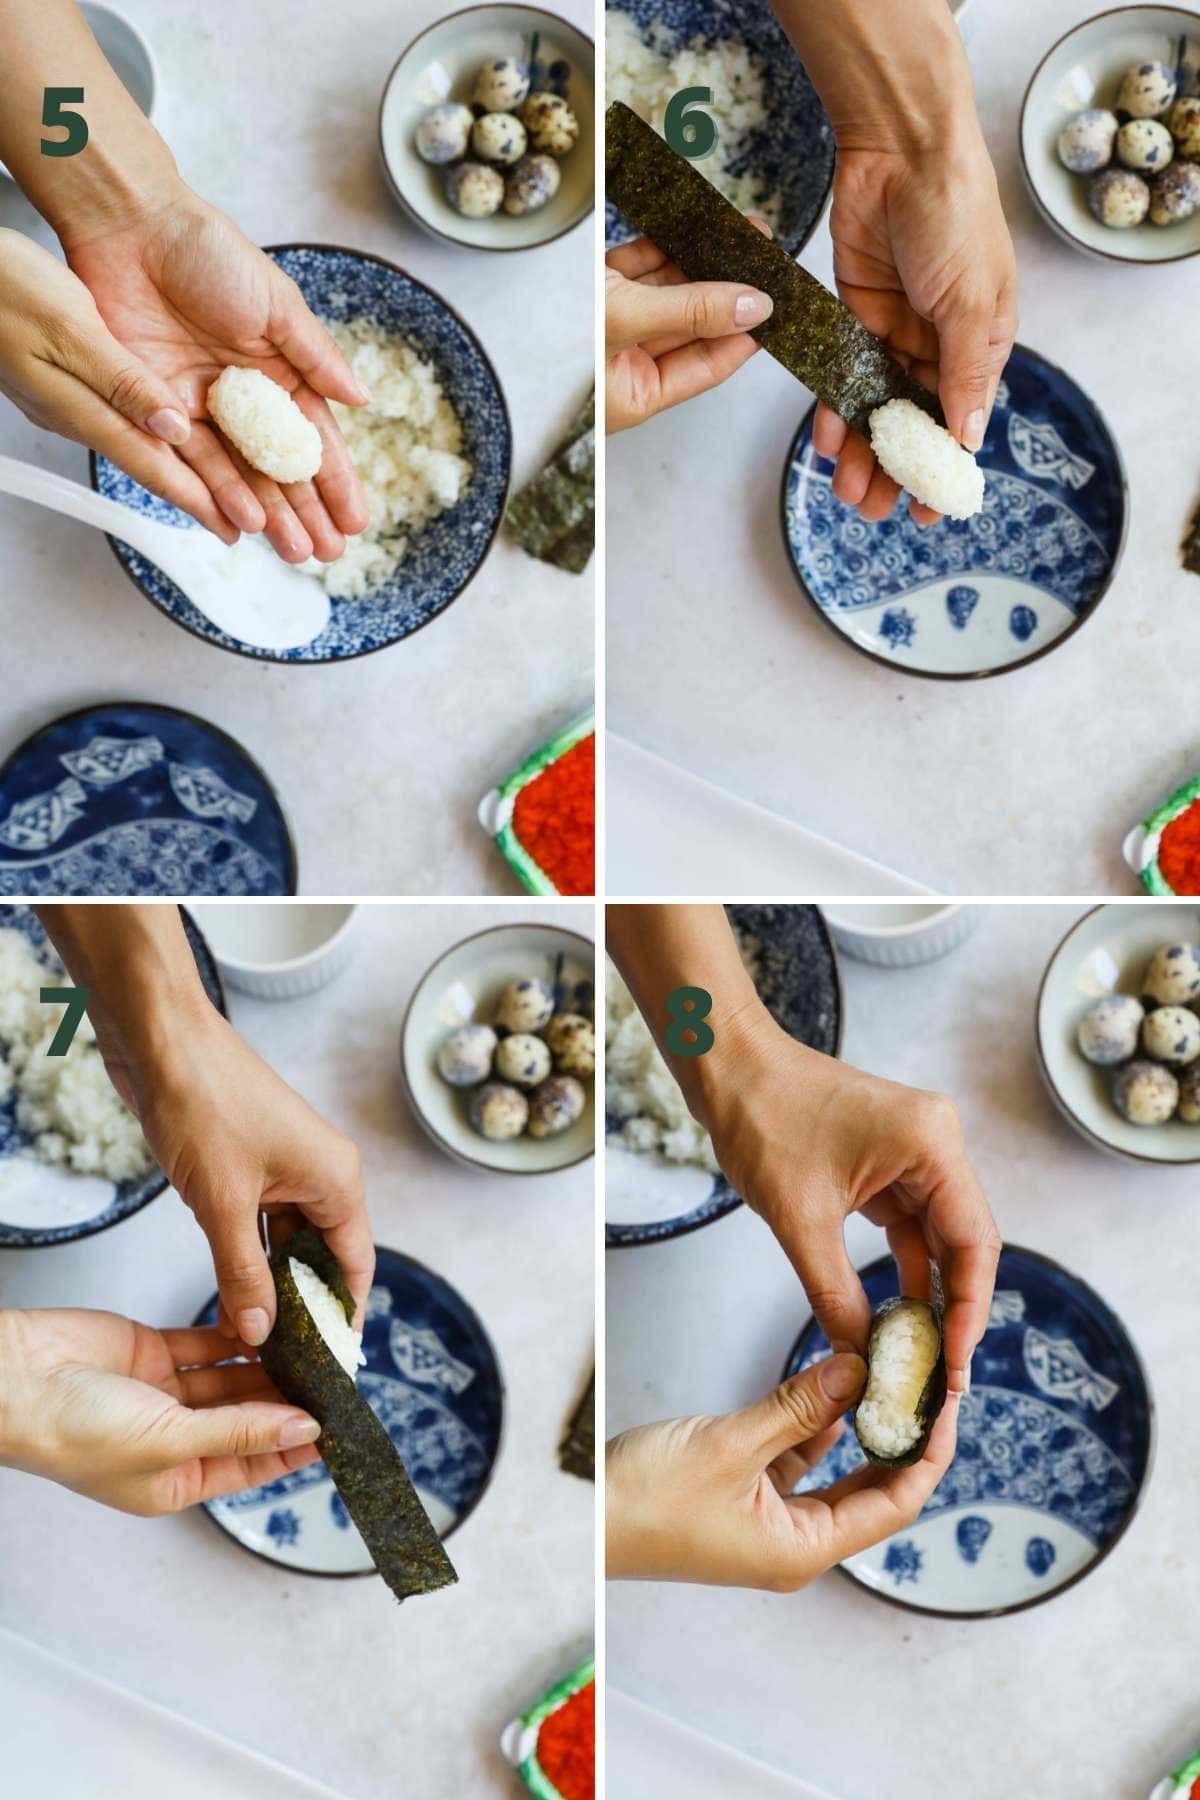 Steps for tobiko quail egg gunkan nigiri sushi, including how to form the rice into an oval and wrap with nori.